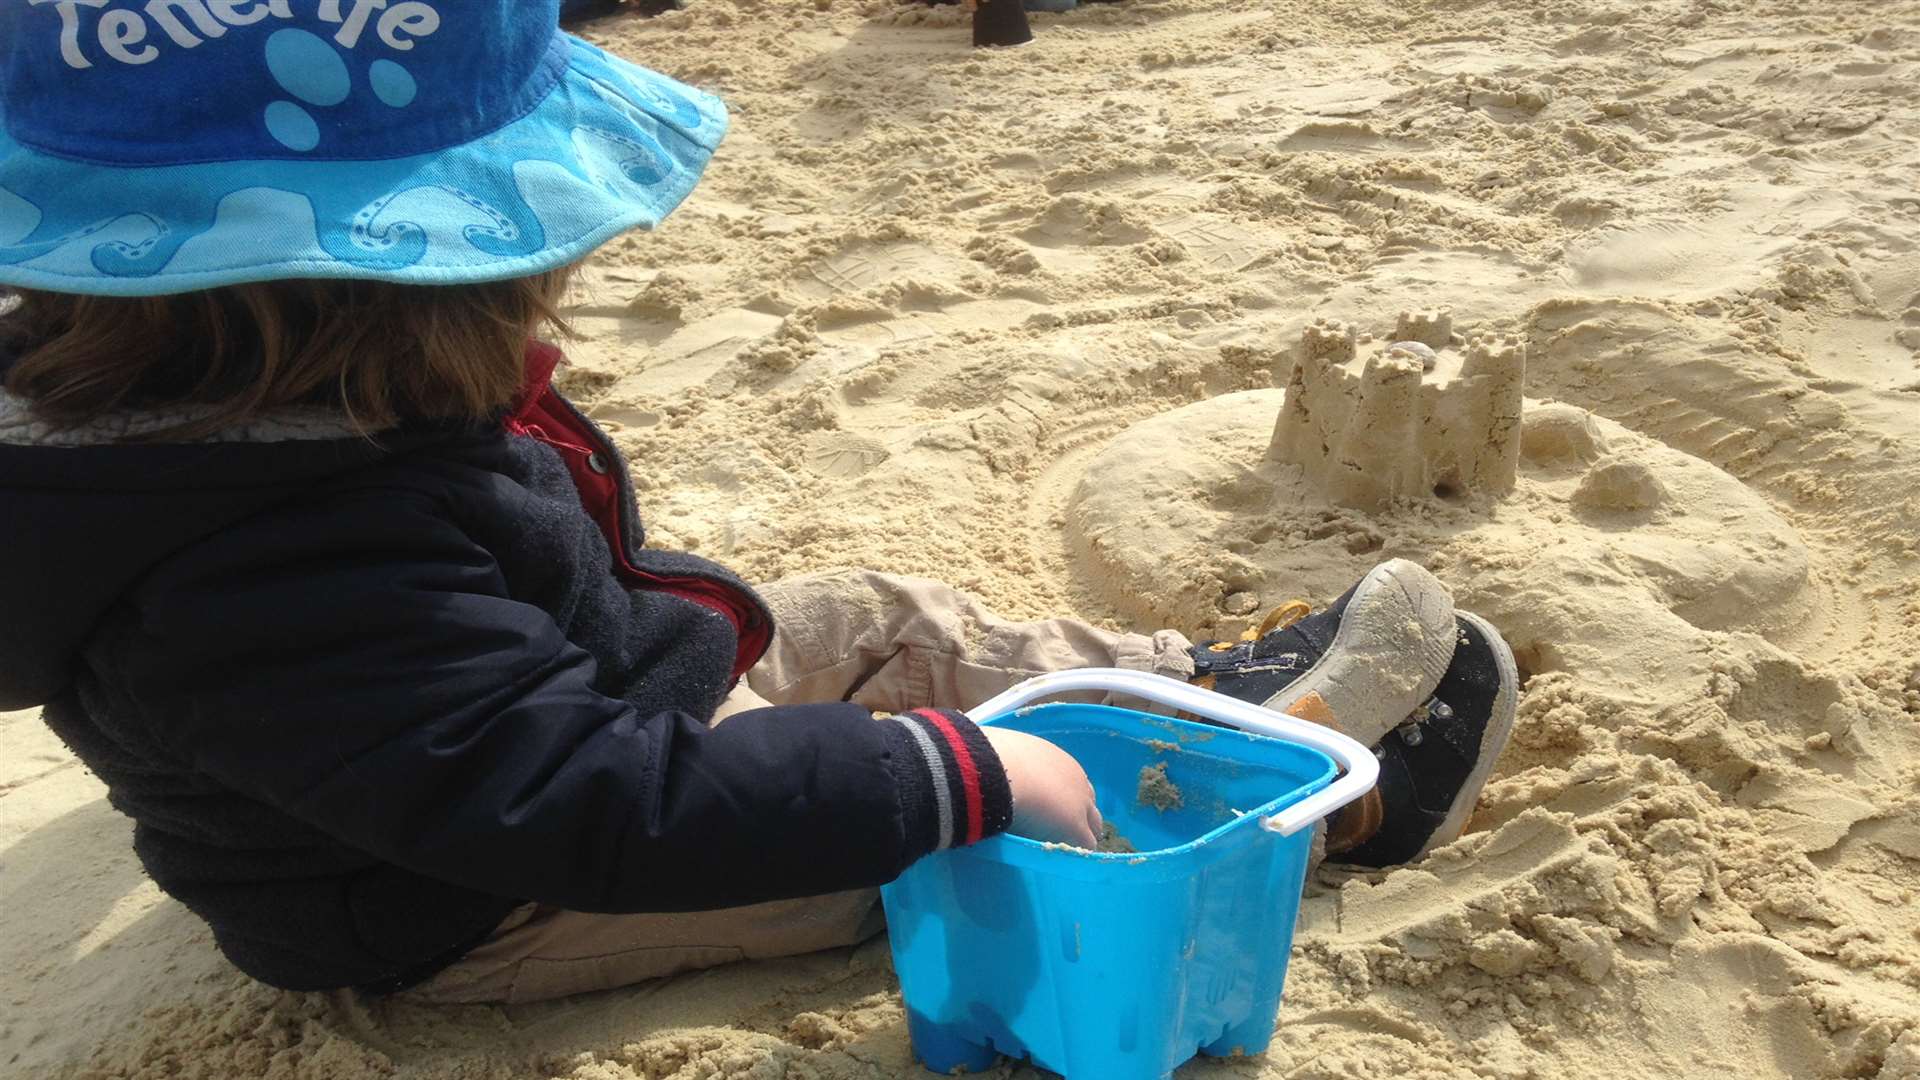 Ollie building sandcastles in the playground's sandpit